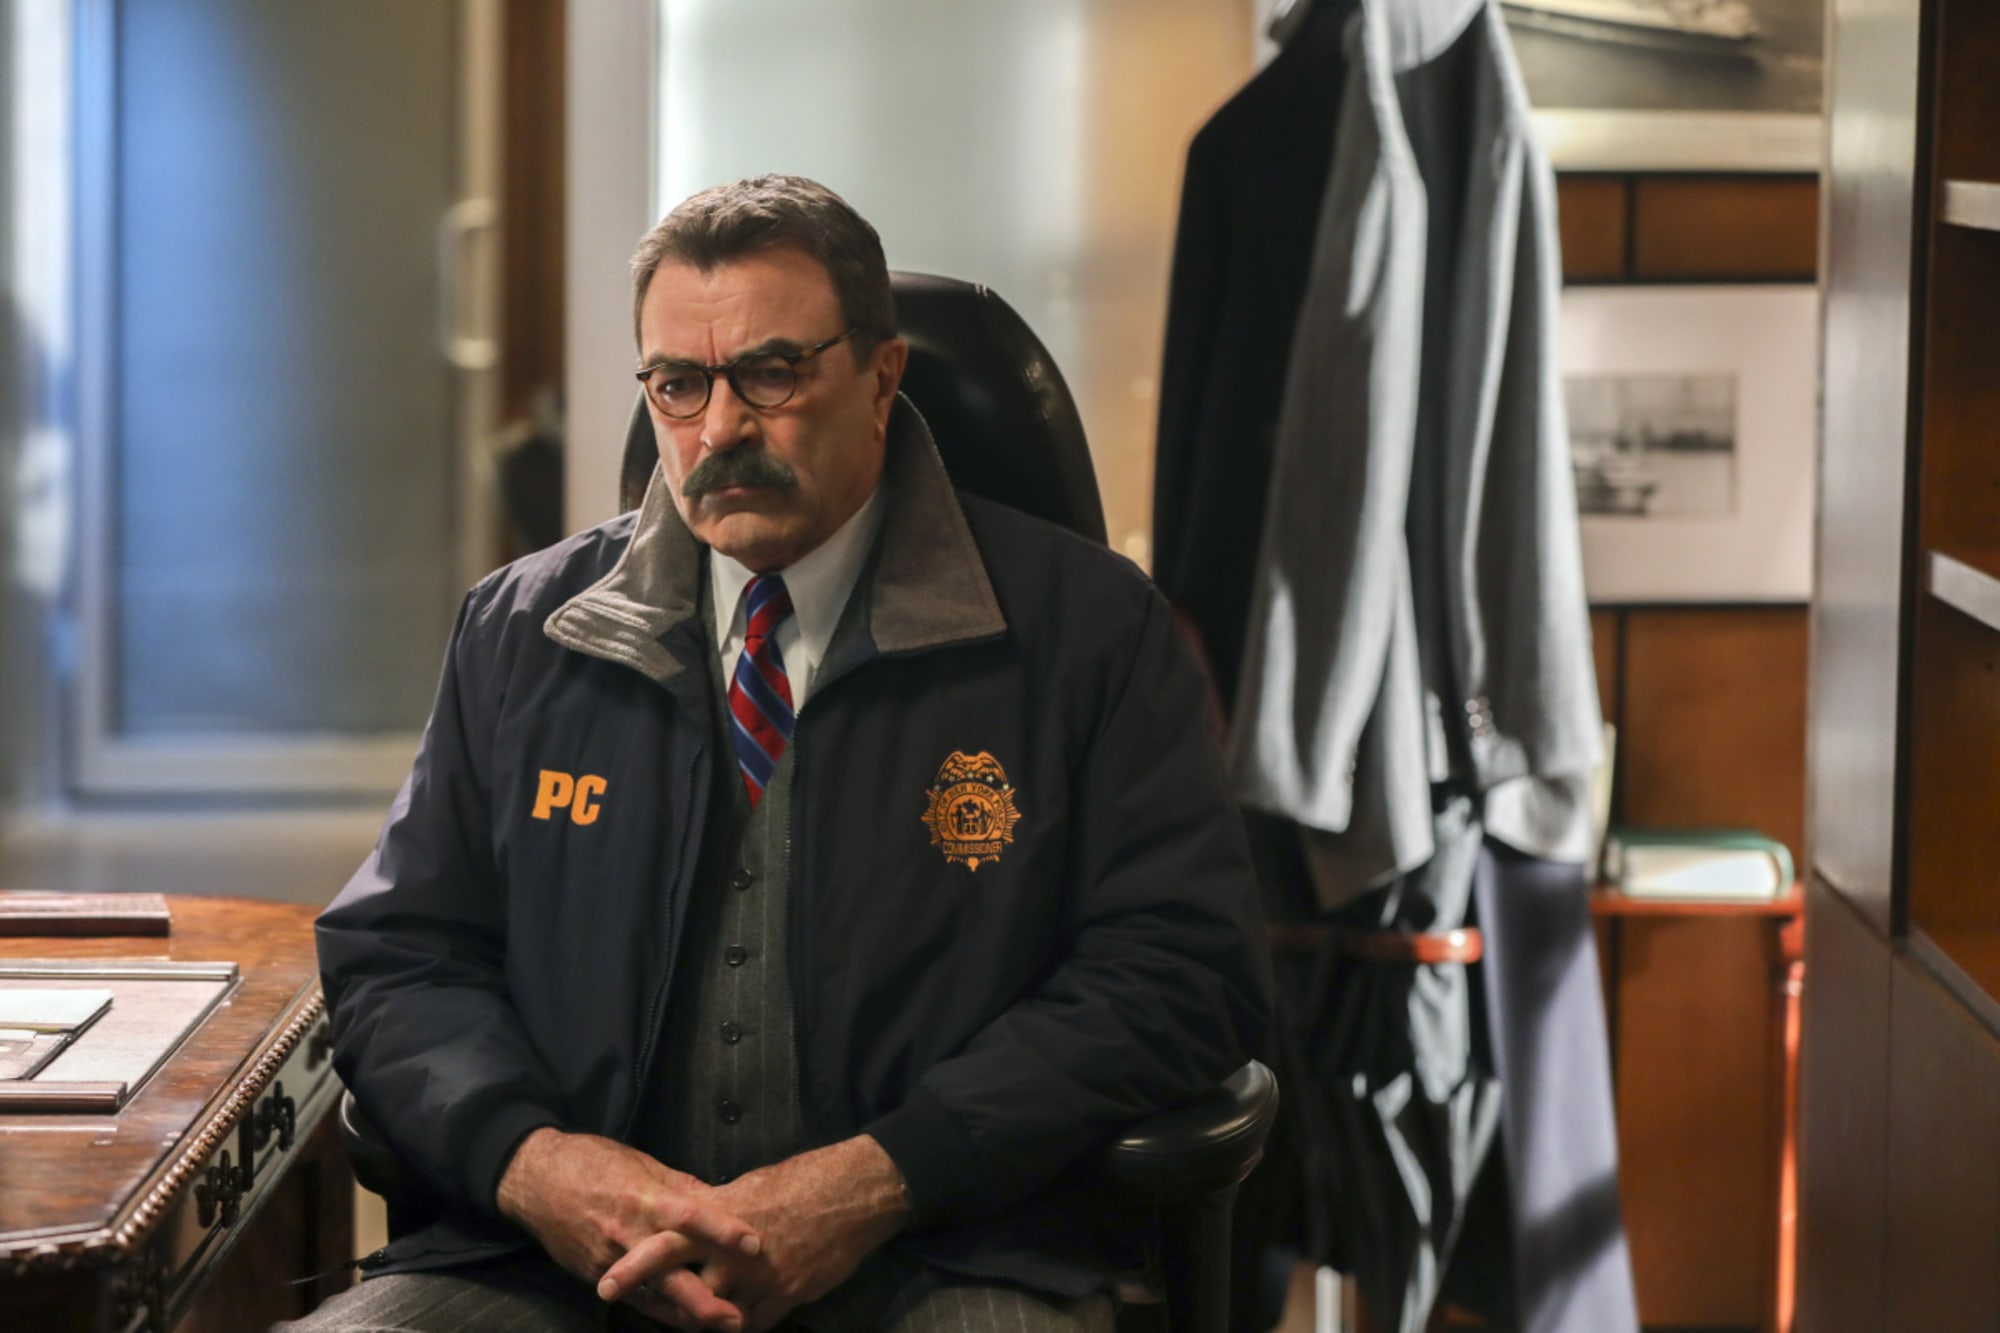 Blue Bloods season 11: 5 questions we have for the CBS series